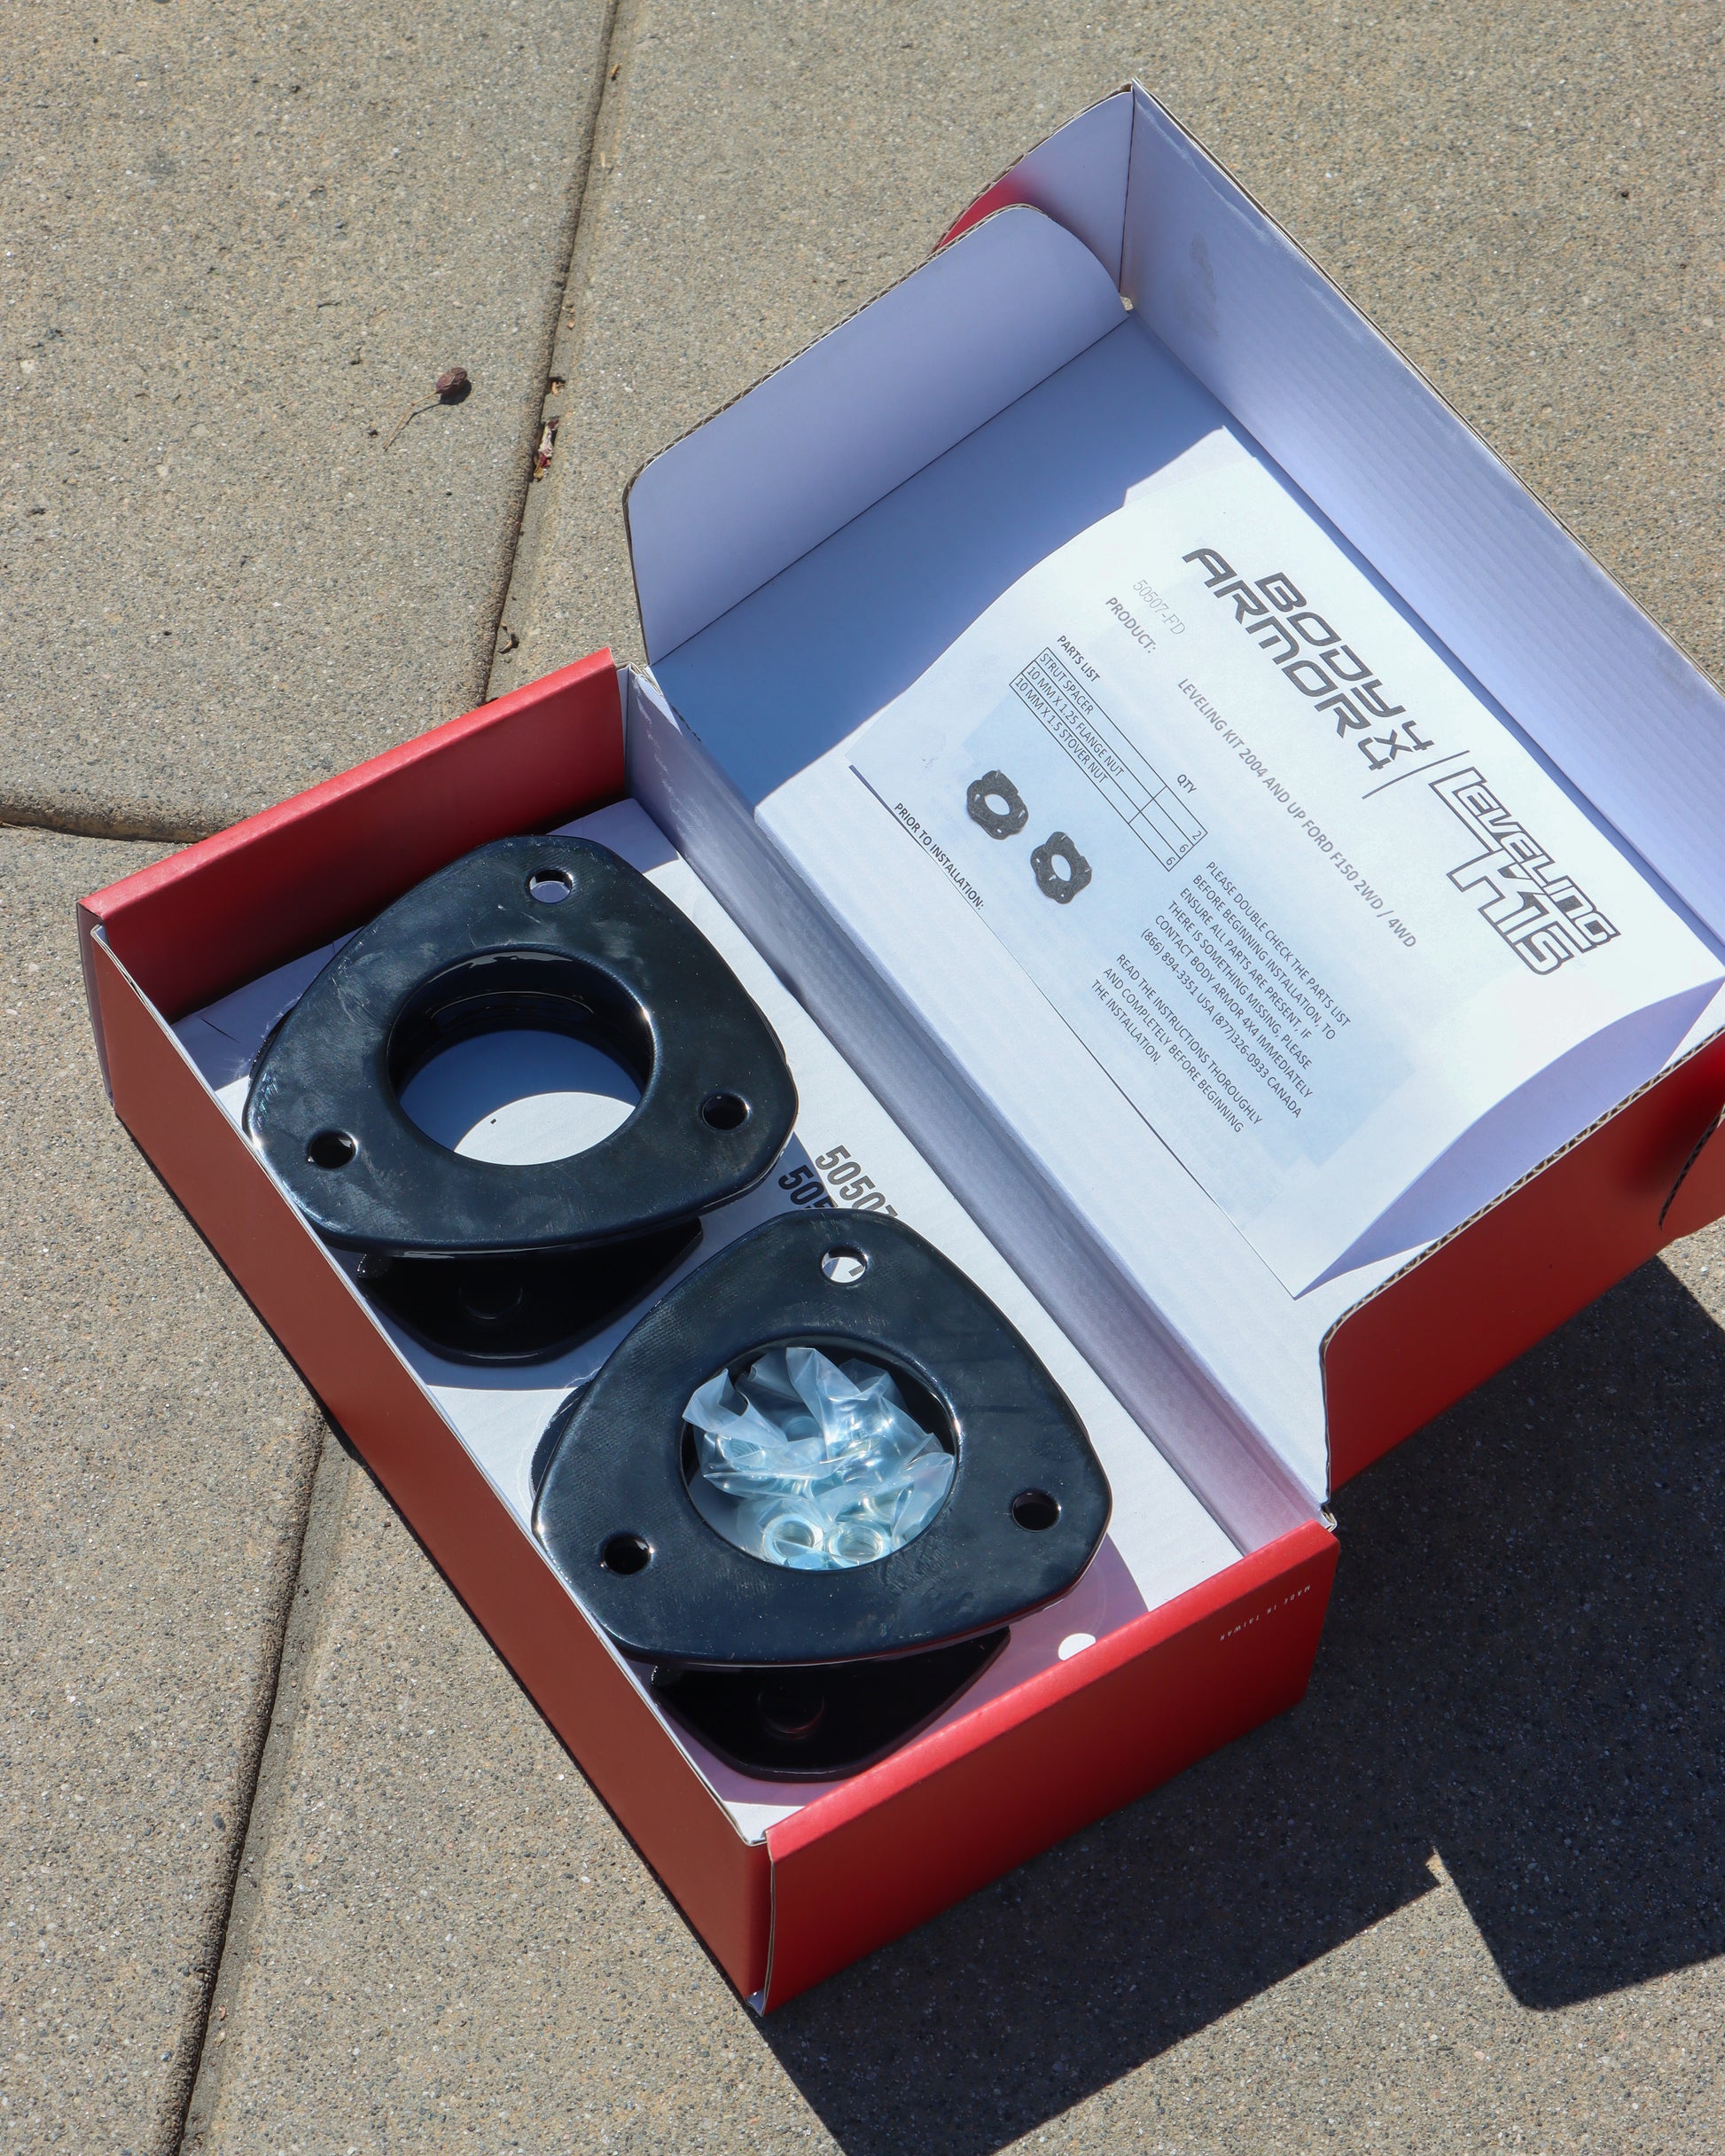 Leveling kit on display in the box with the hardware inside.